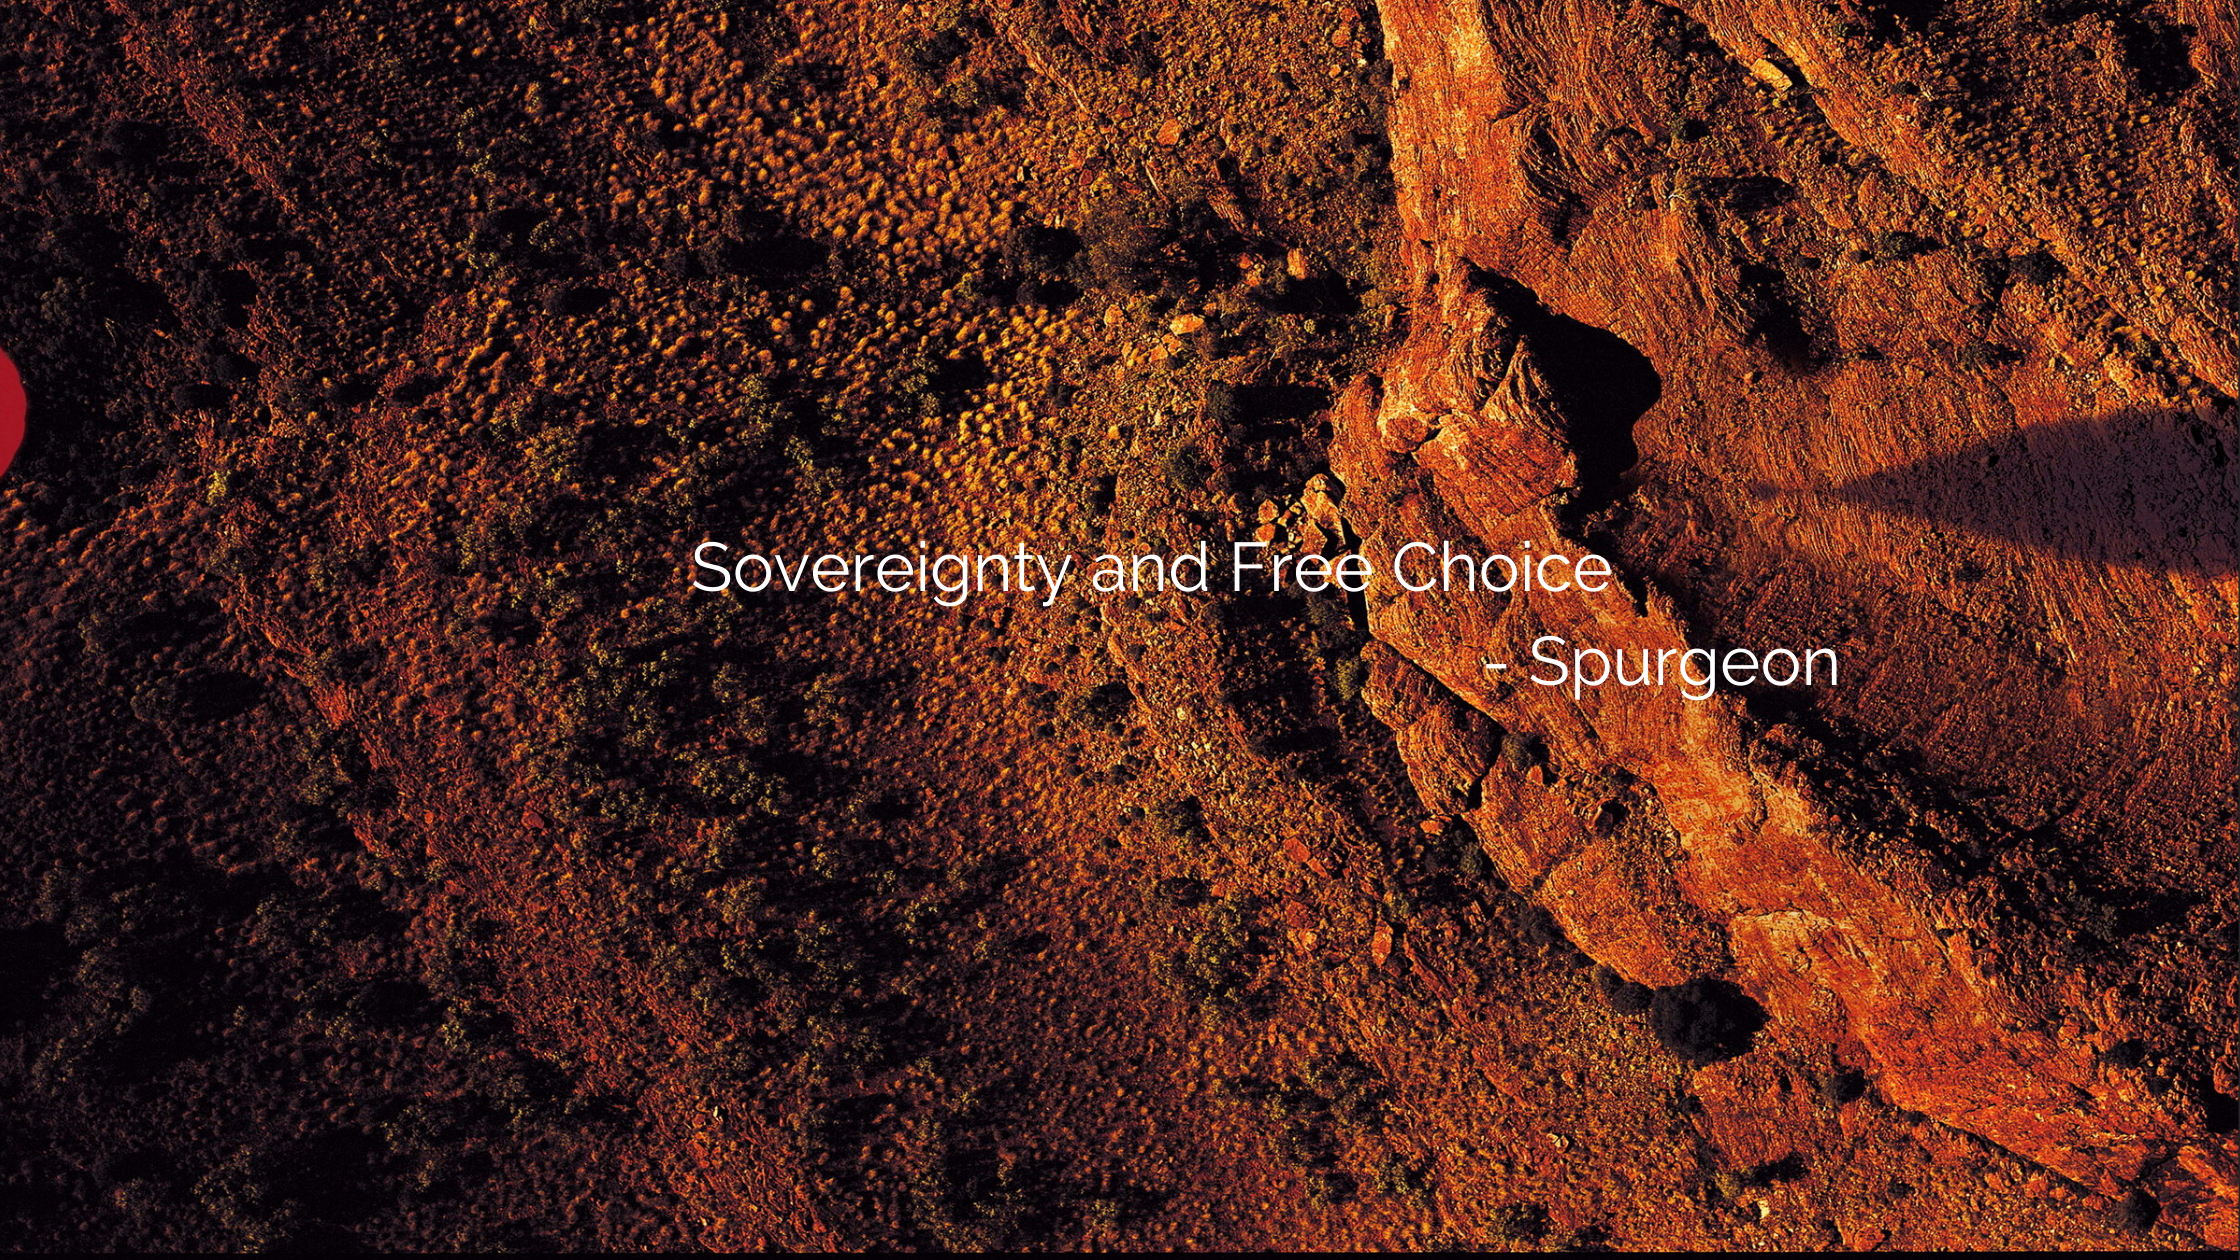 Sovereignty and Free Choice – Quote of the week